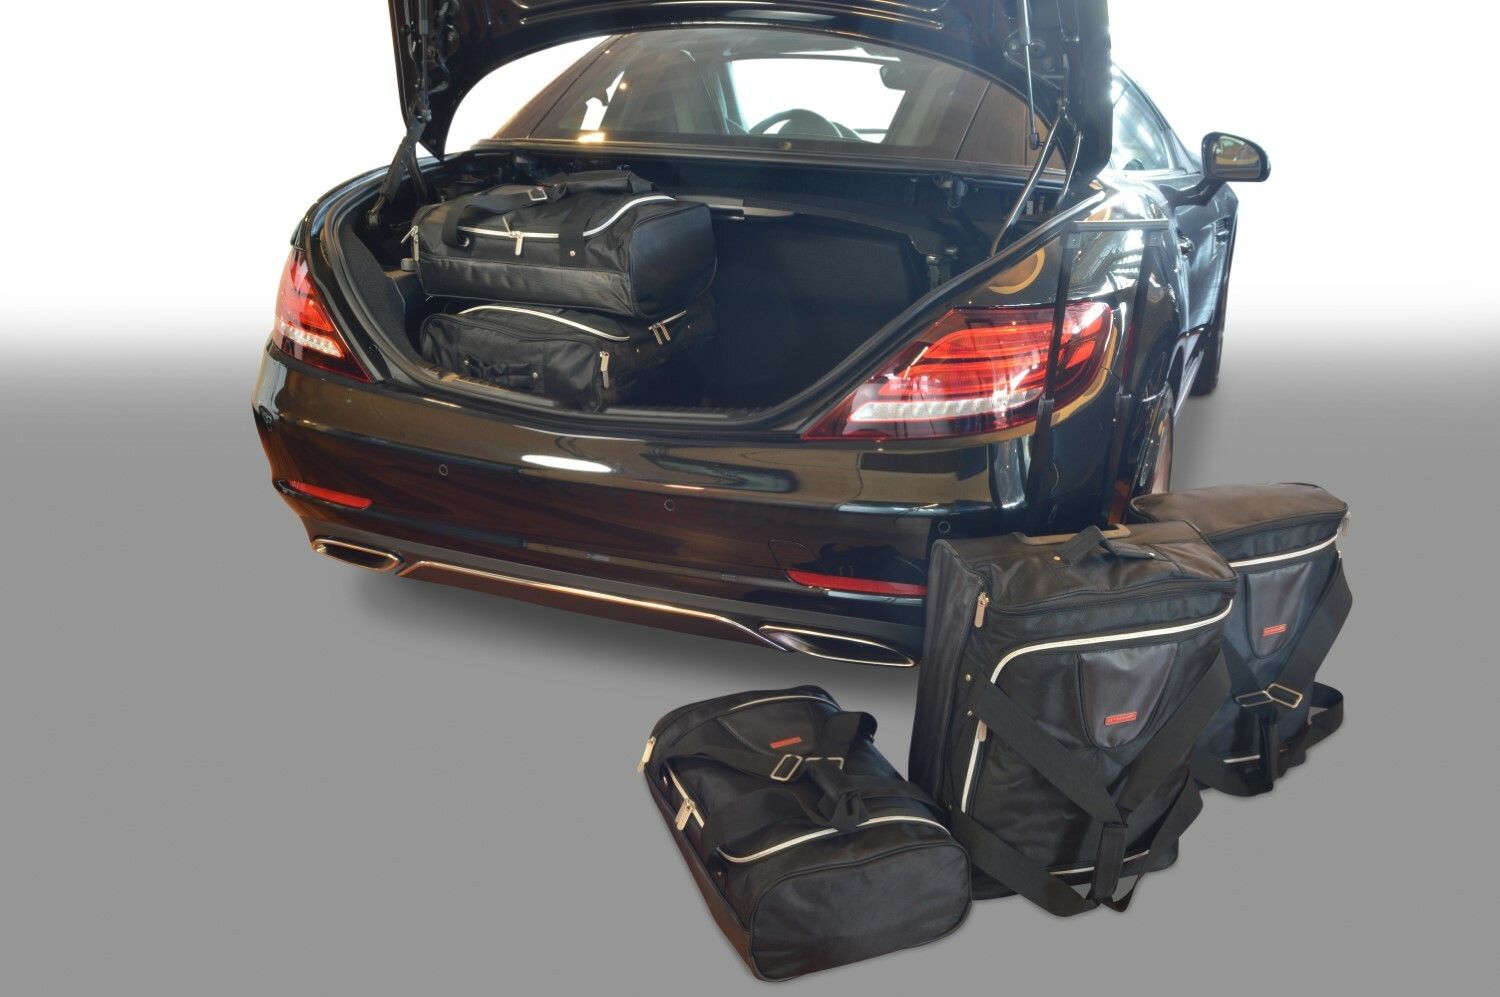 Want to buy a durable Mercedes-Benz cover? - Car-Bags custom made travel  bags - Premium Accessories for Your On-the-Go Lifestyle